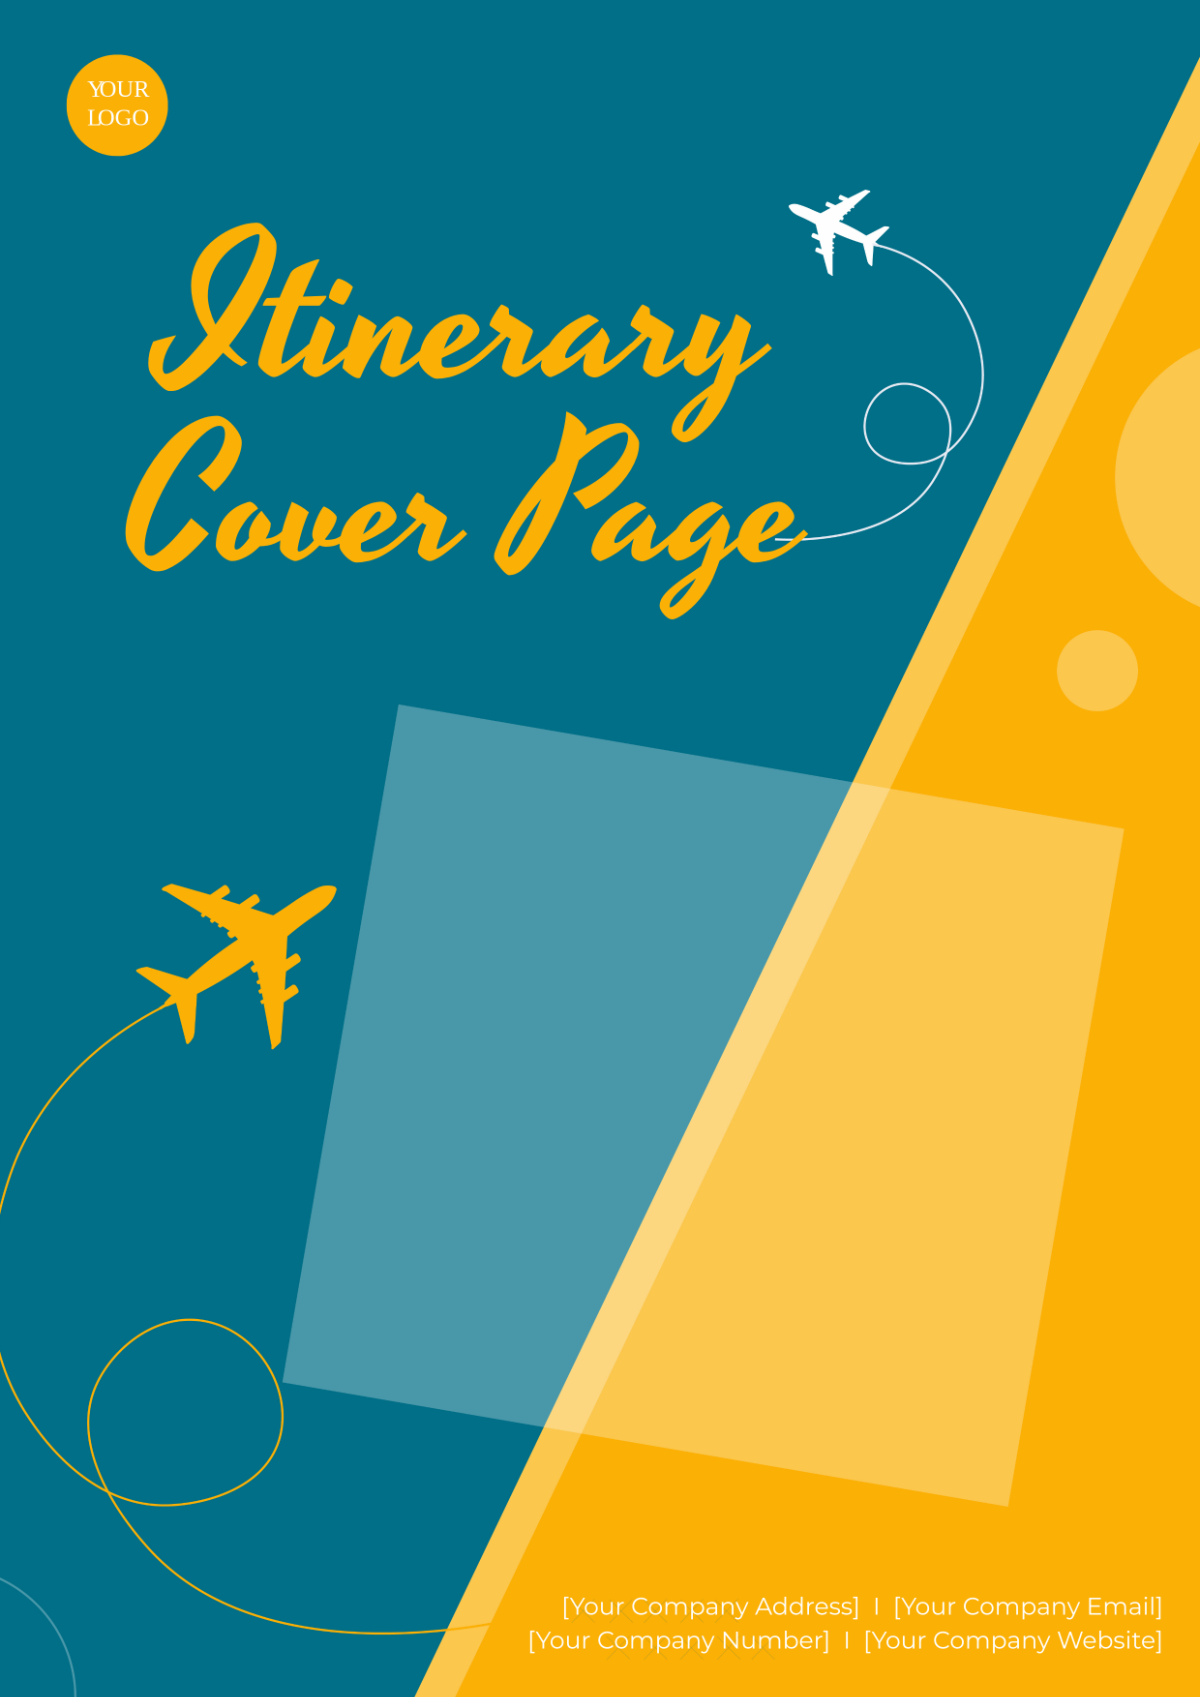 Itinerary Cover Page